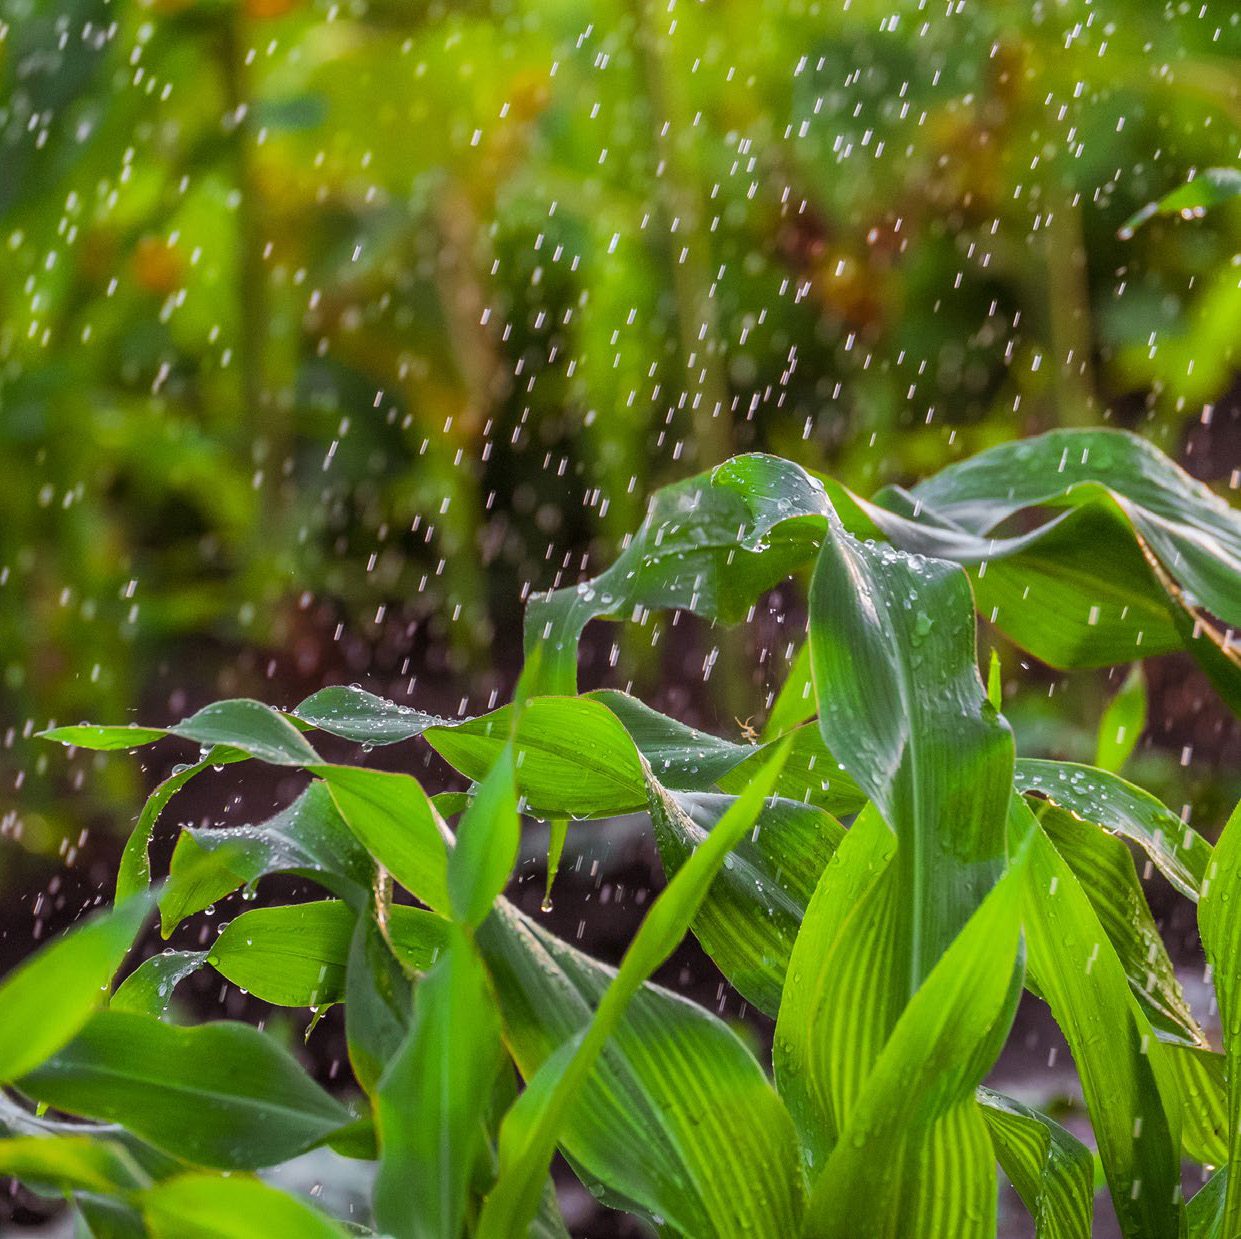 Water droplets sprinkling over green plants.